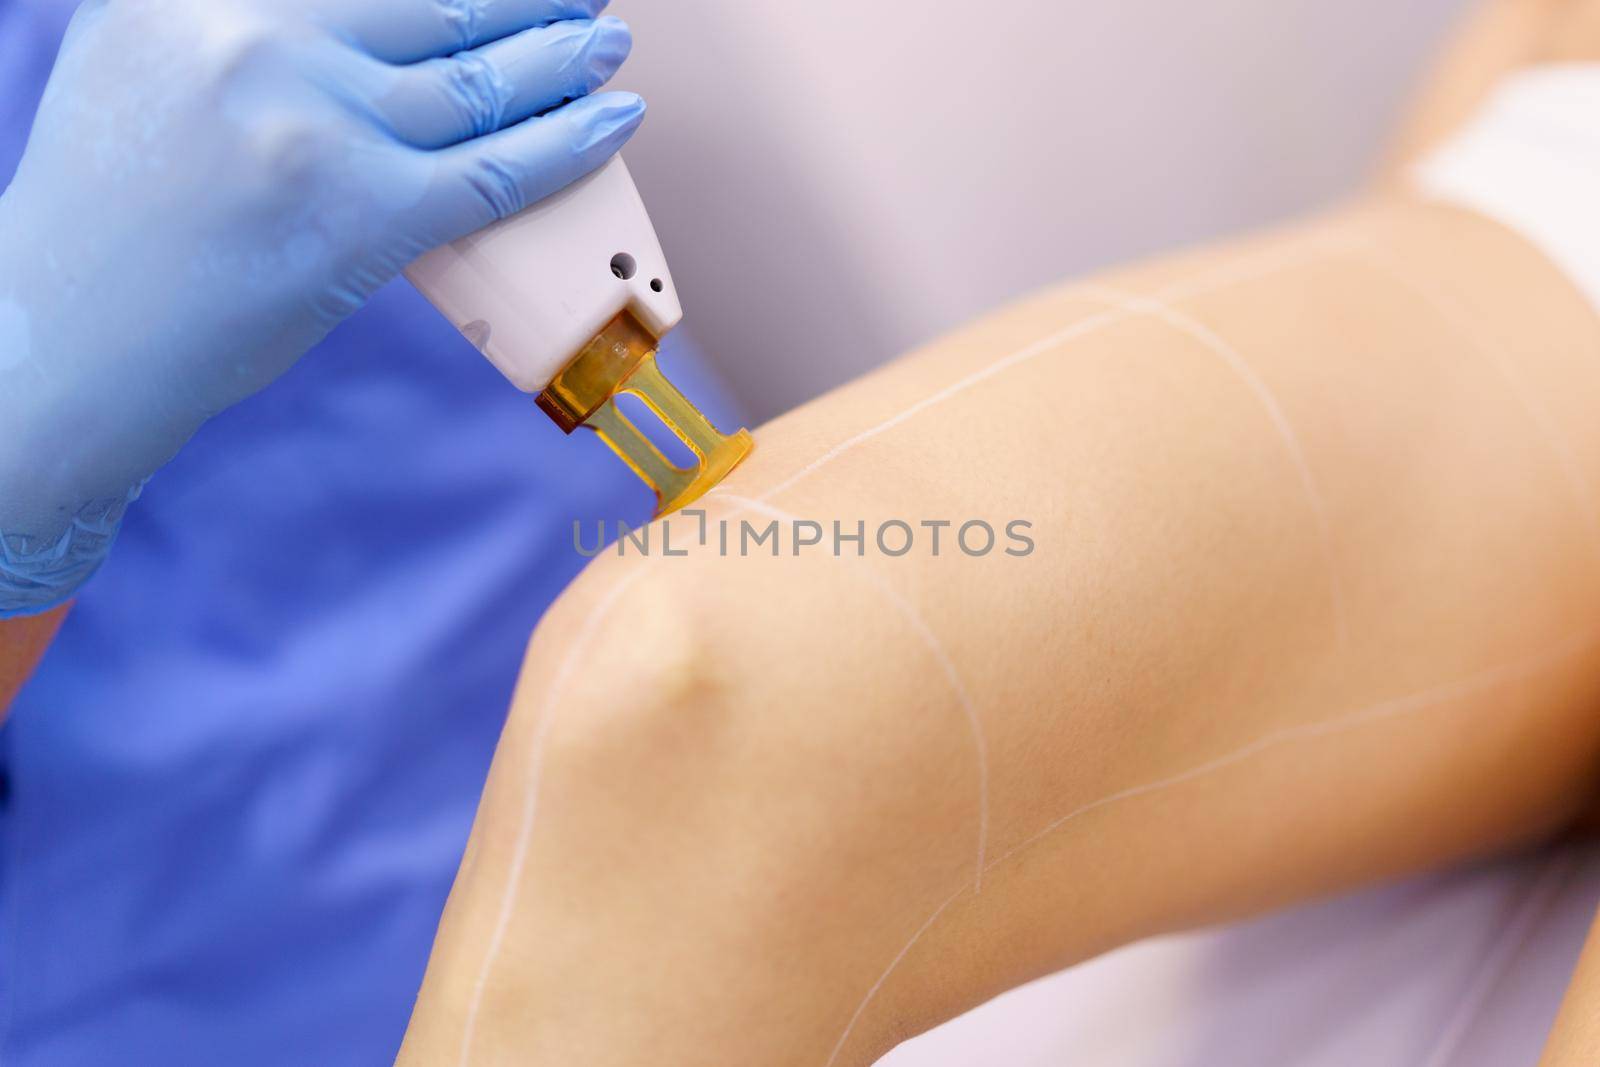 Woman receiving legs laser hair removal at a beauty center. by javiindy